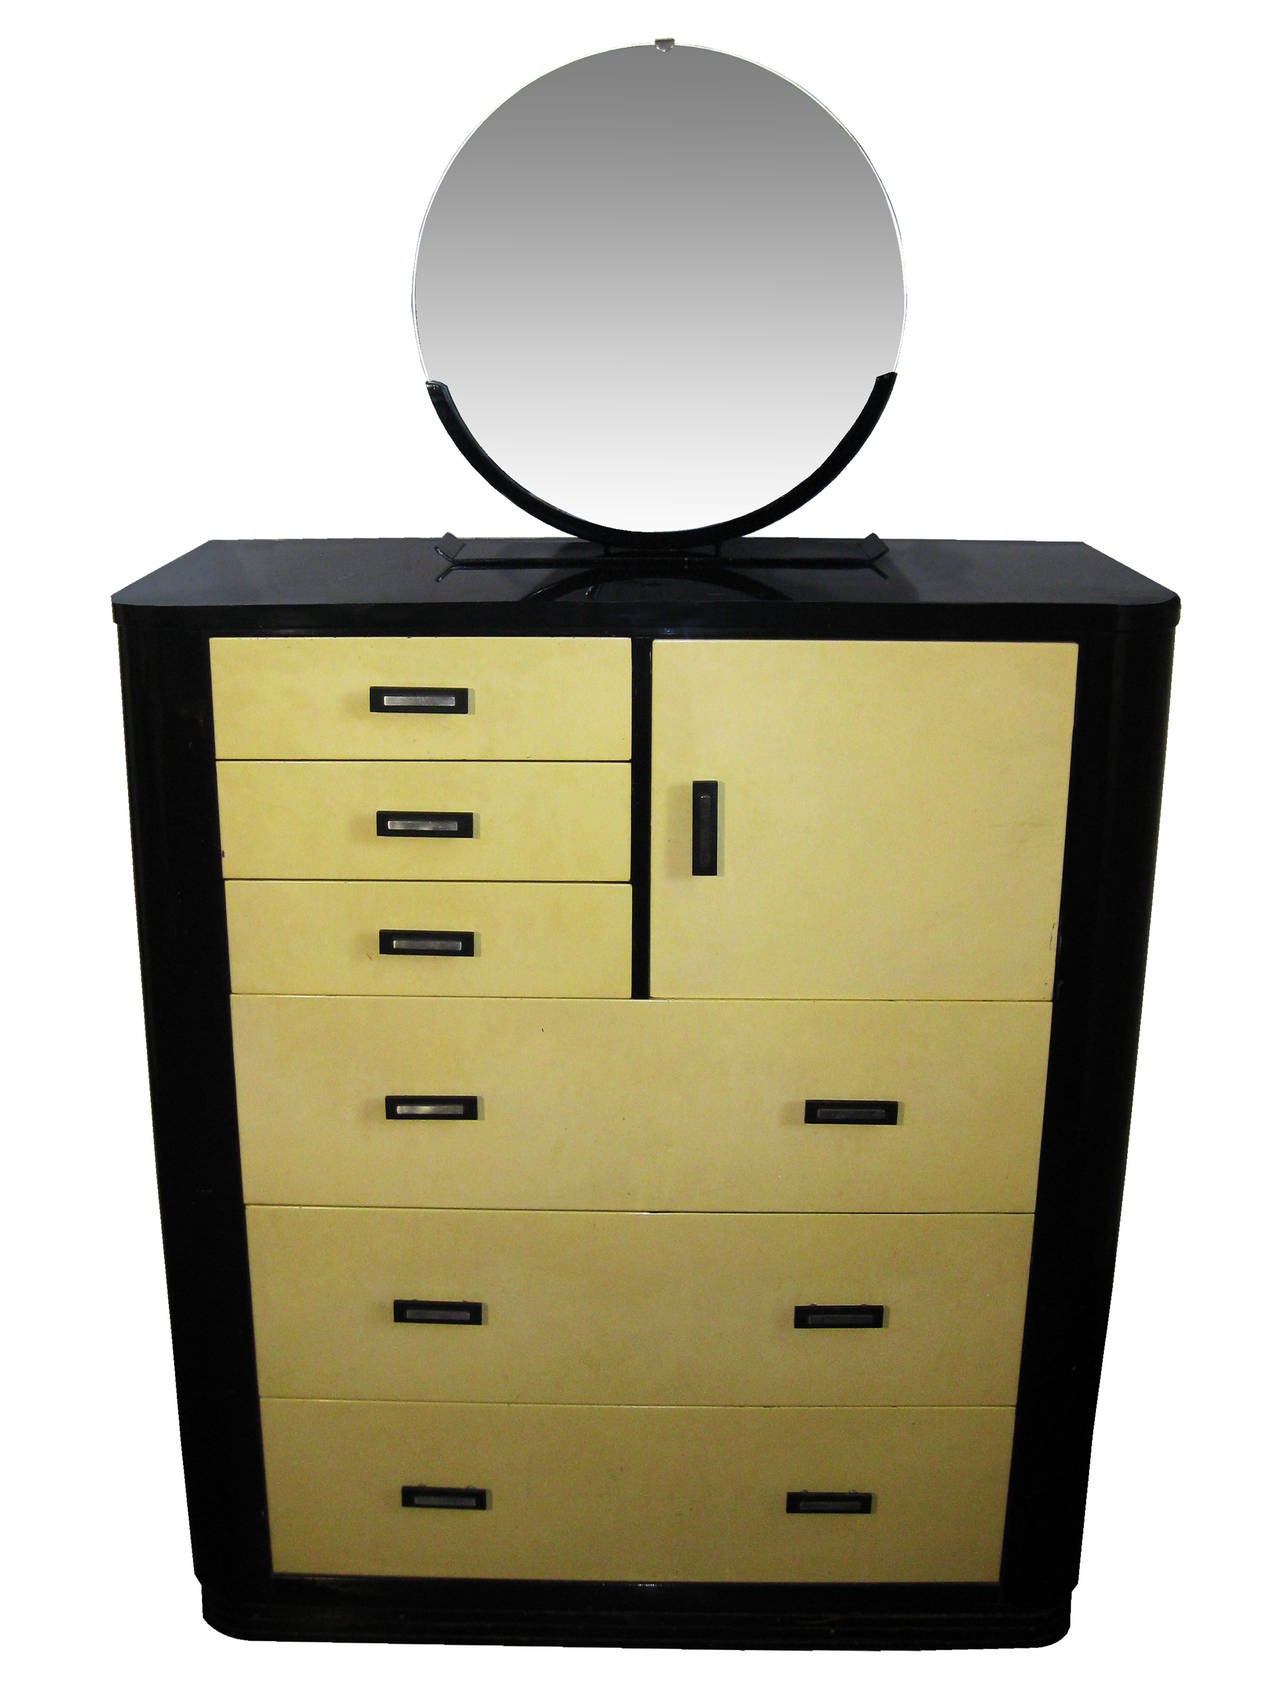 American Gentleman's Dresser of Lacquered Metal with Removable Mirror, Norman Bel Geddes